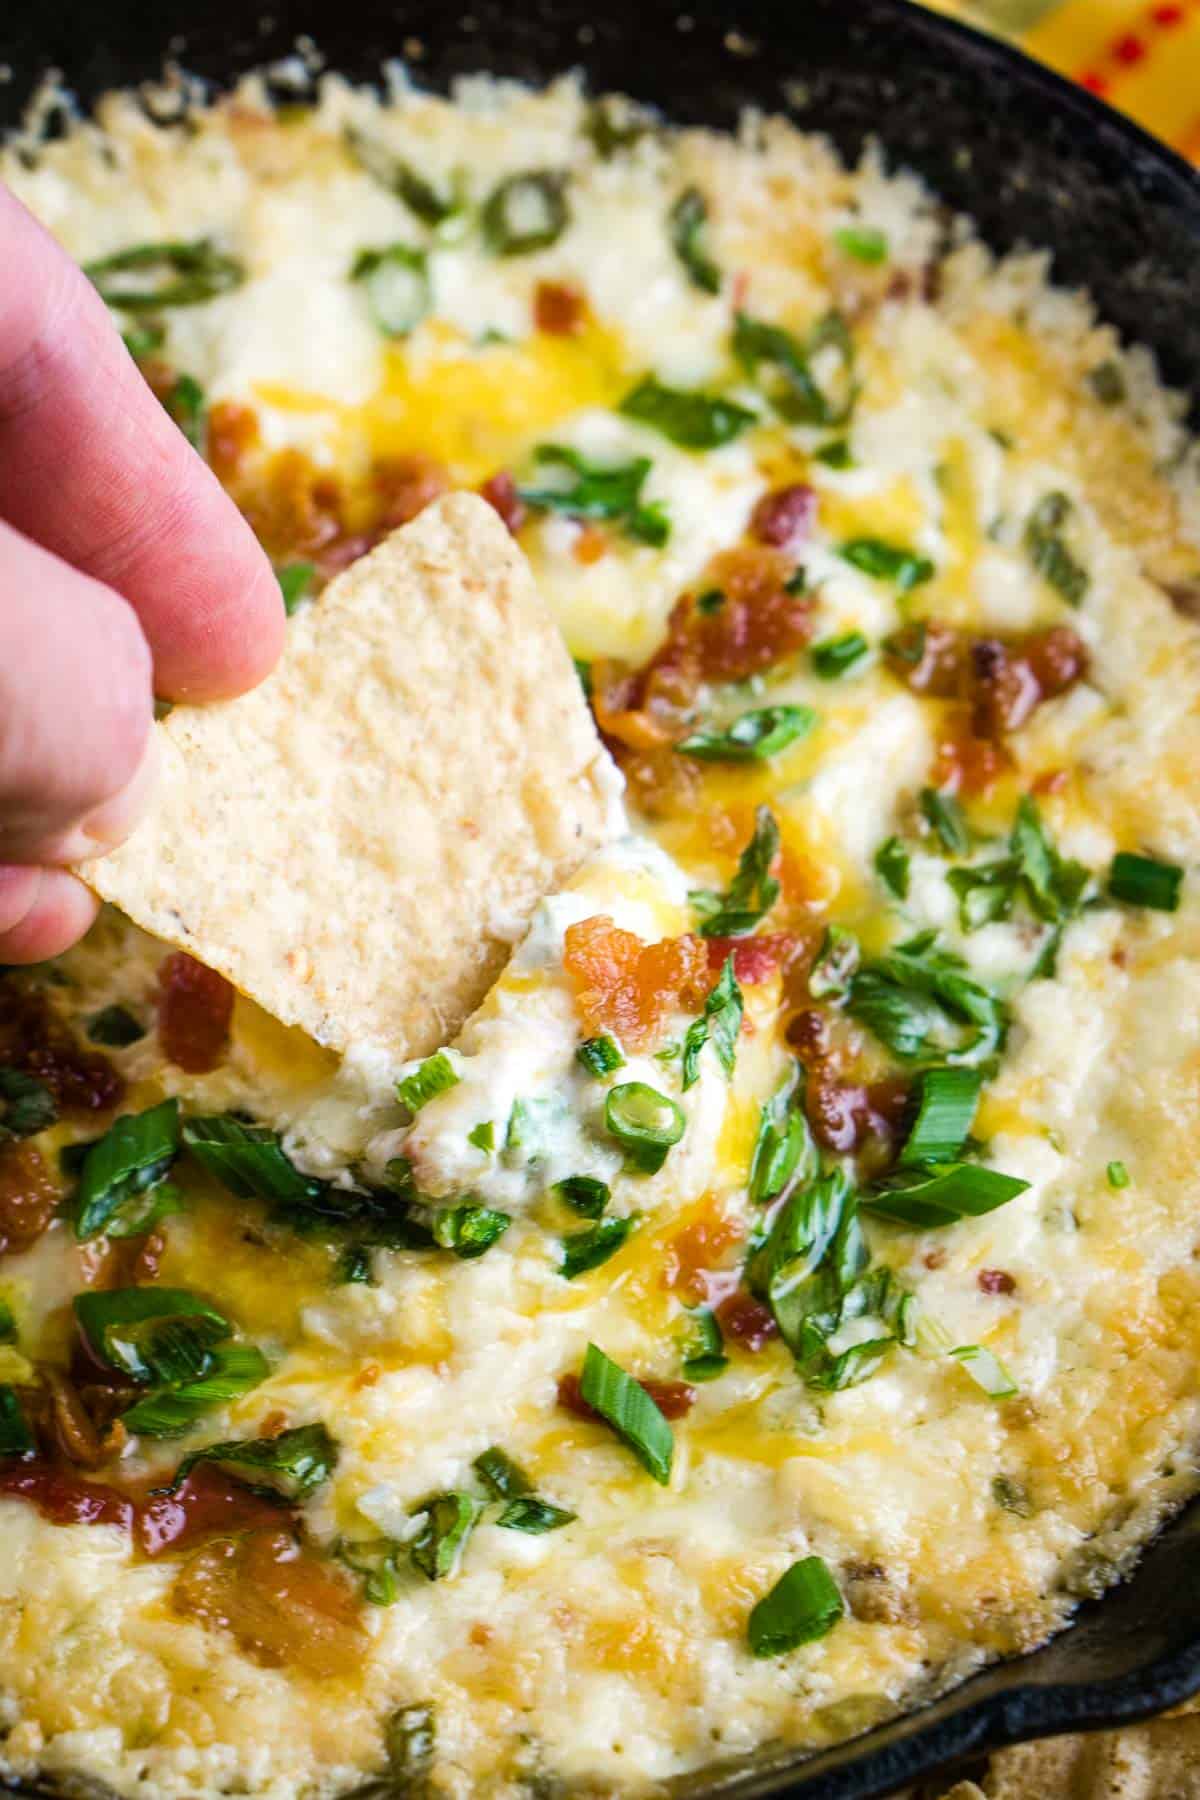 Hand is scooping up jalapeno popper dip with a tortilla chip